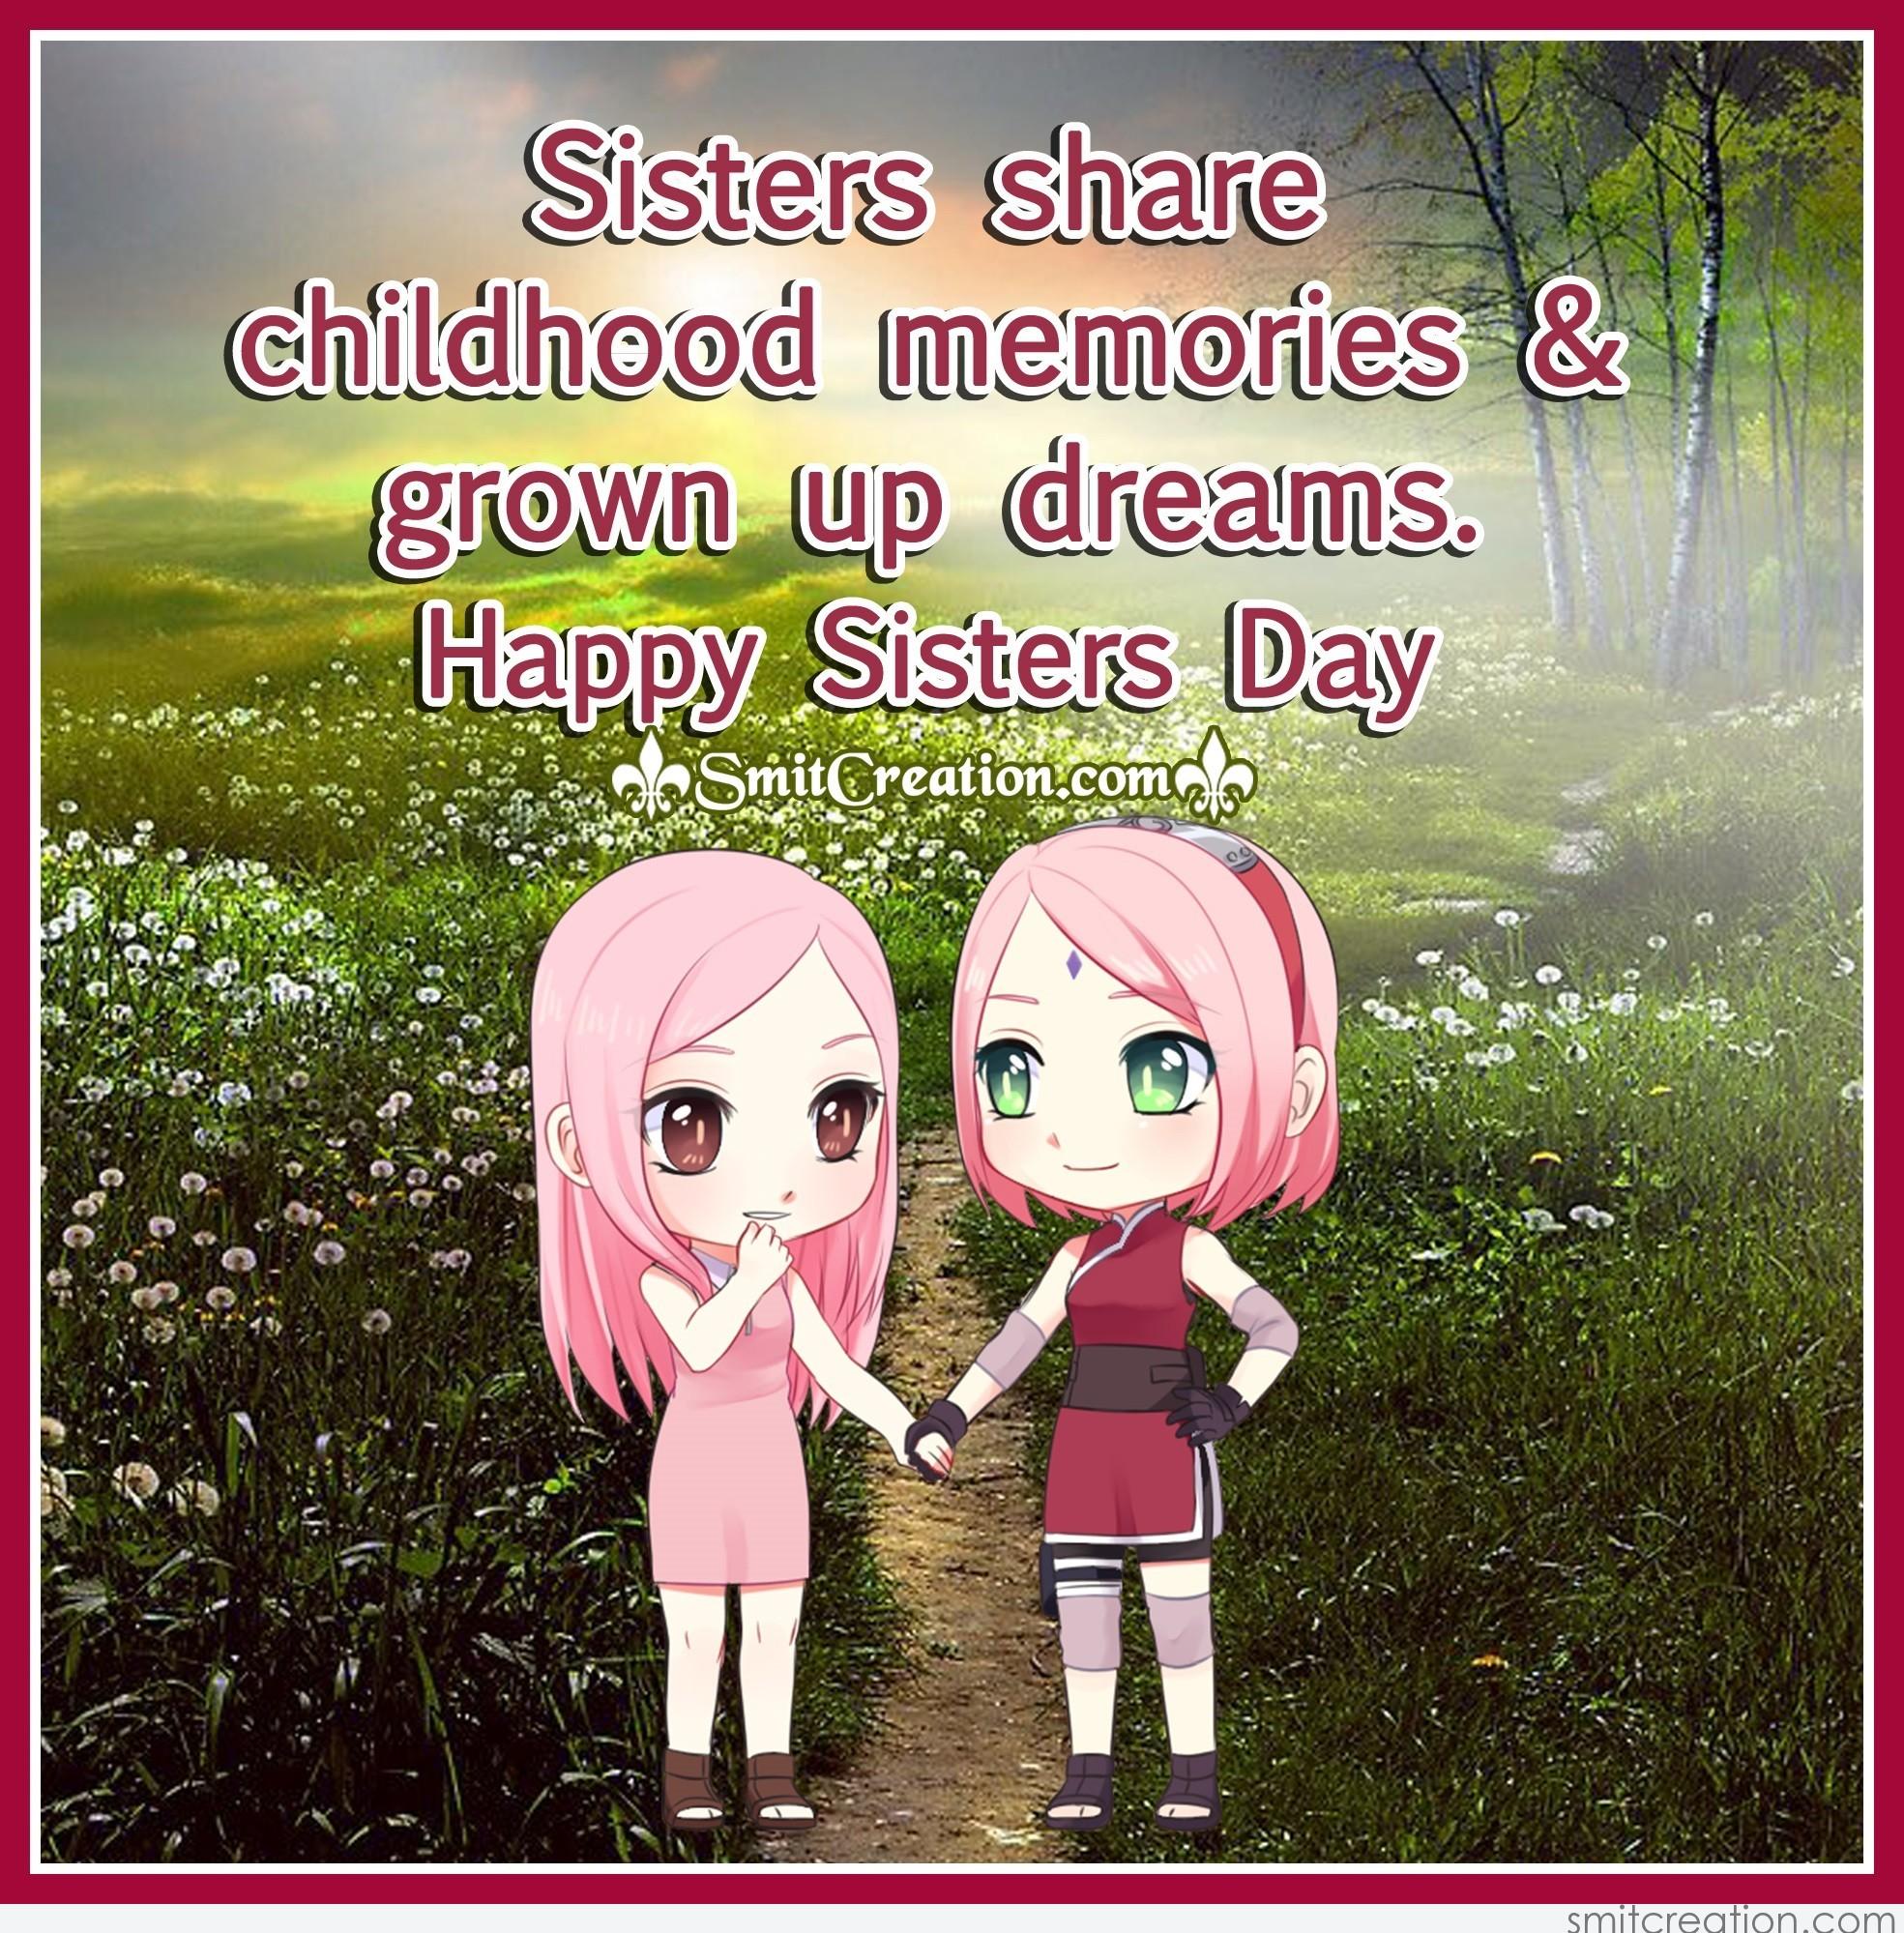 Sisters Day Image, Picture and Graphics